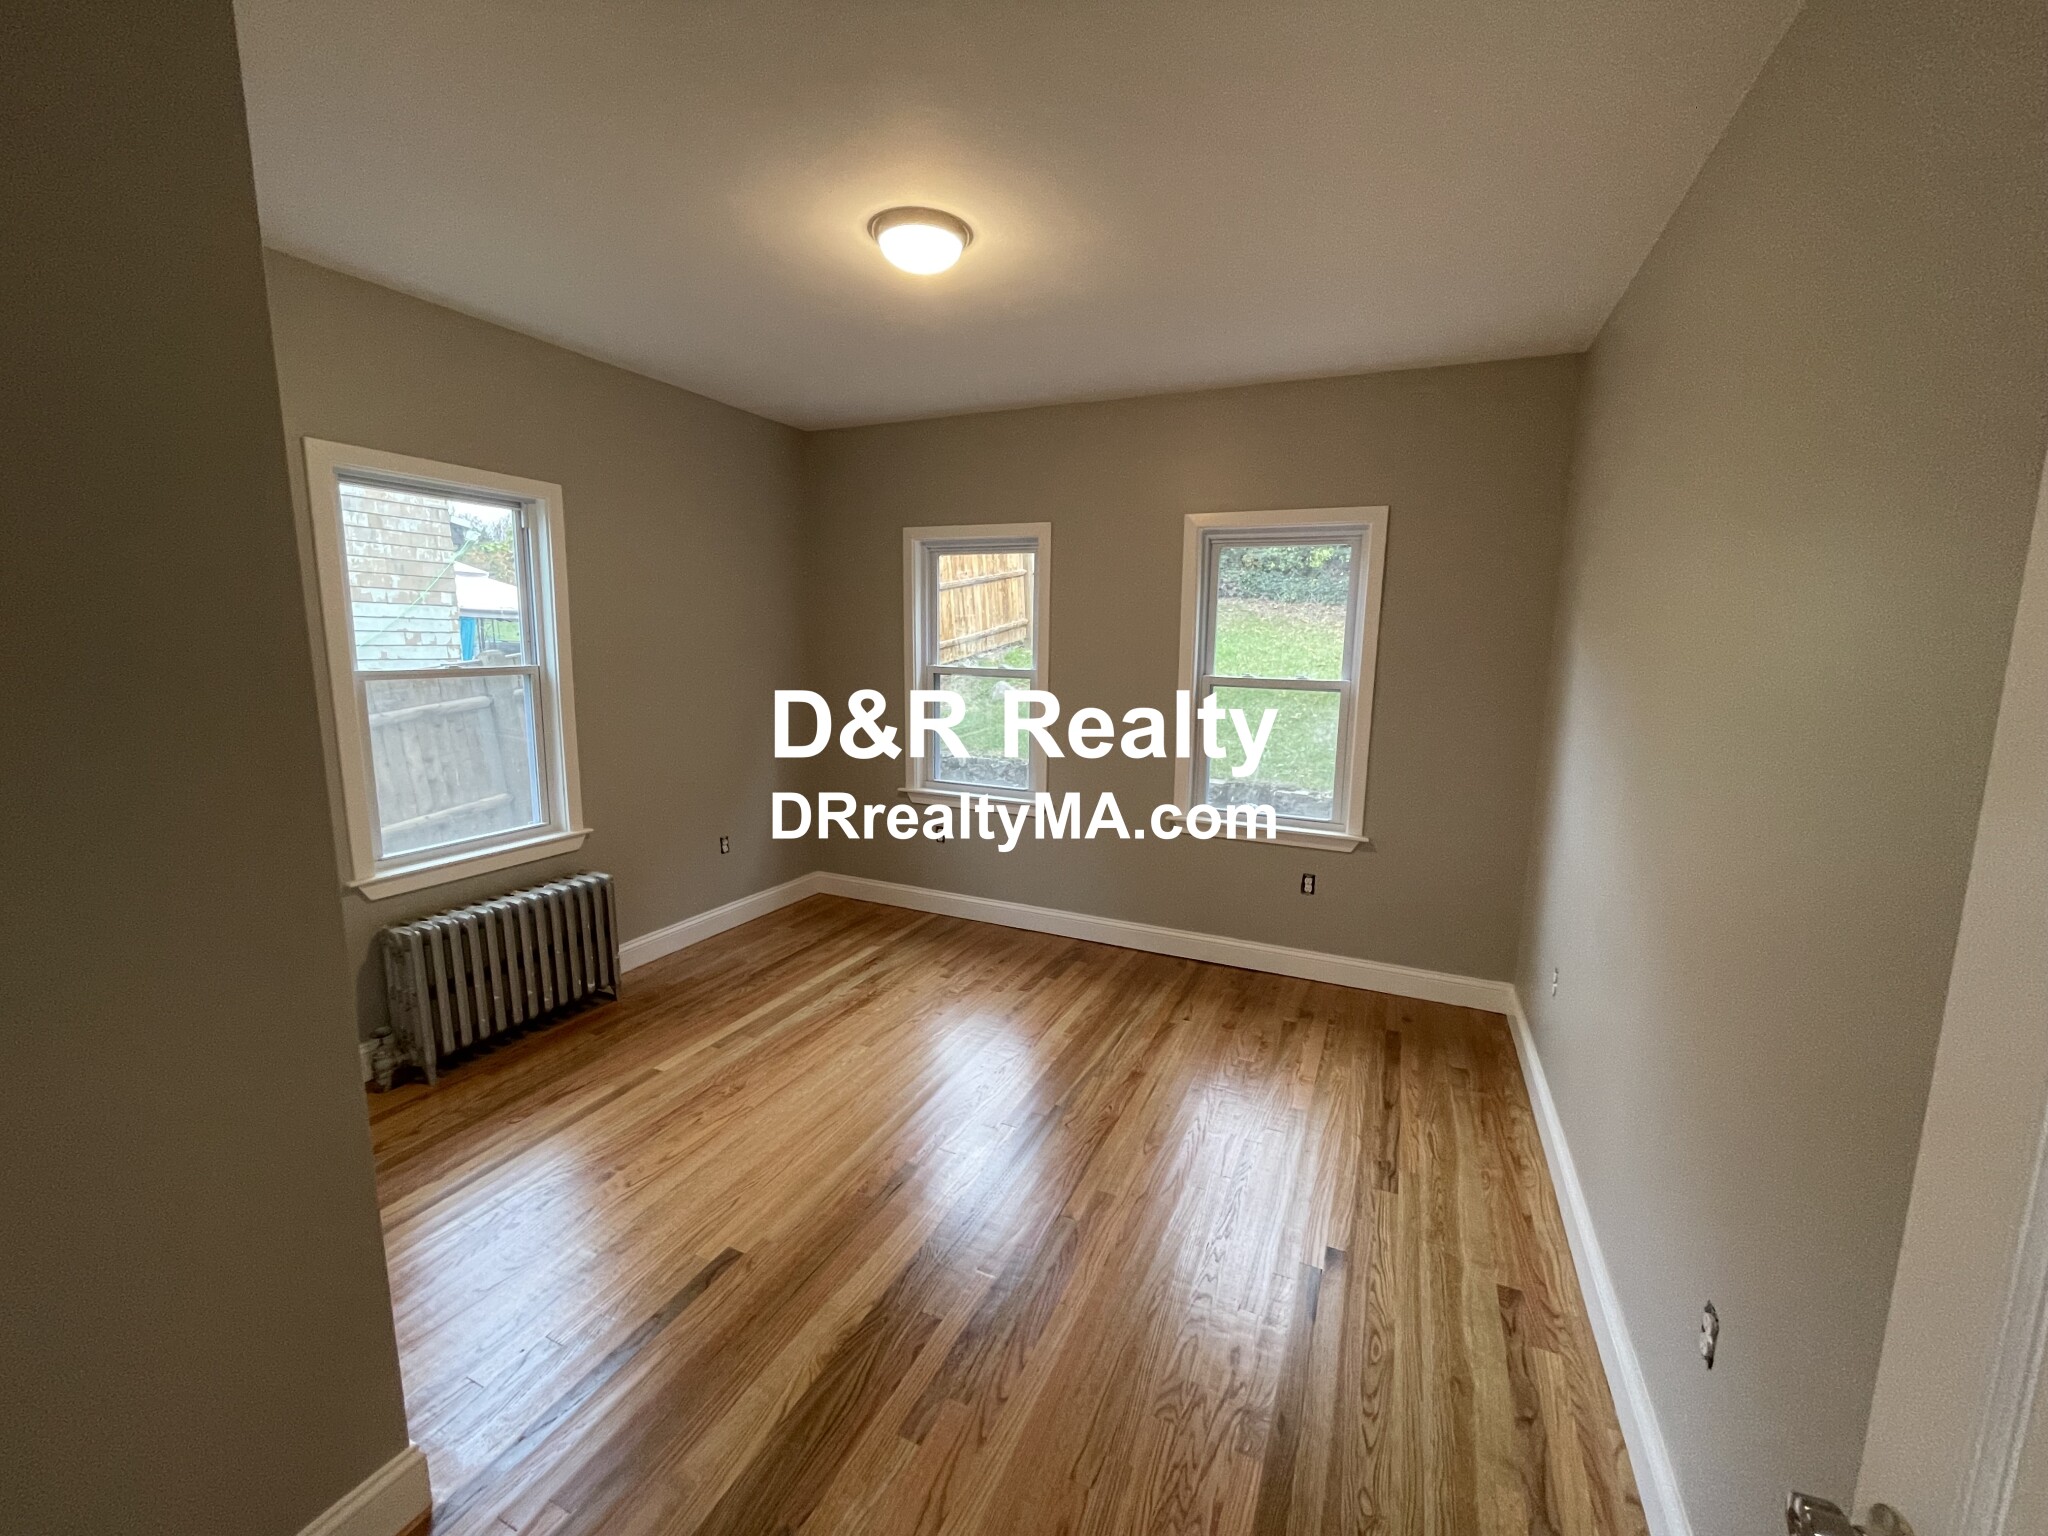 Photos of apartment on Fremont Ave.,Everett MA 02149